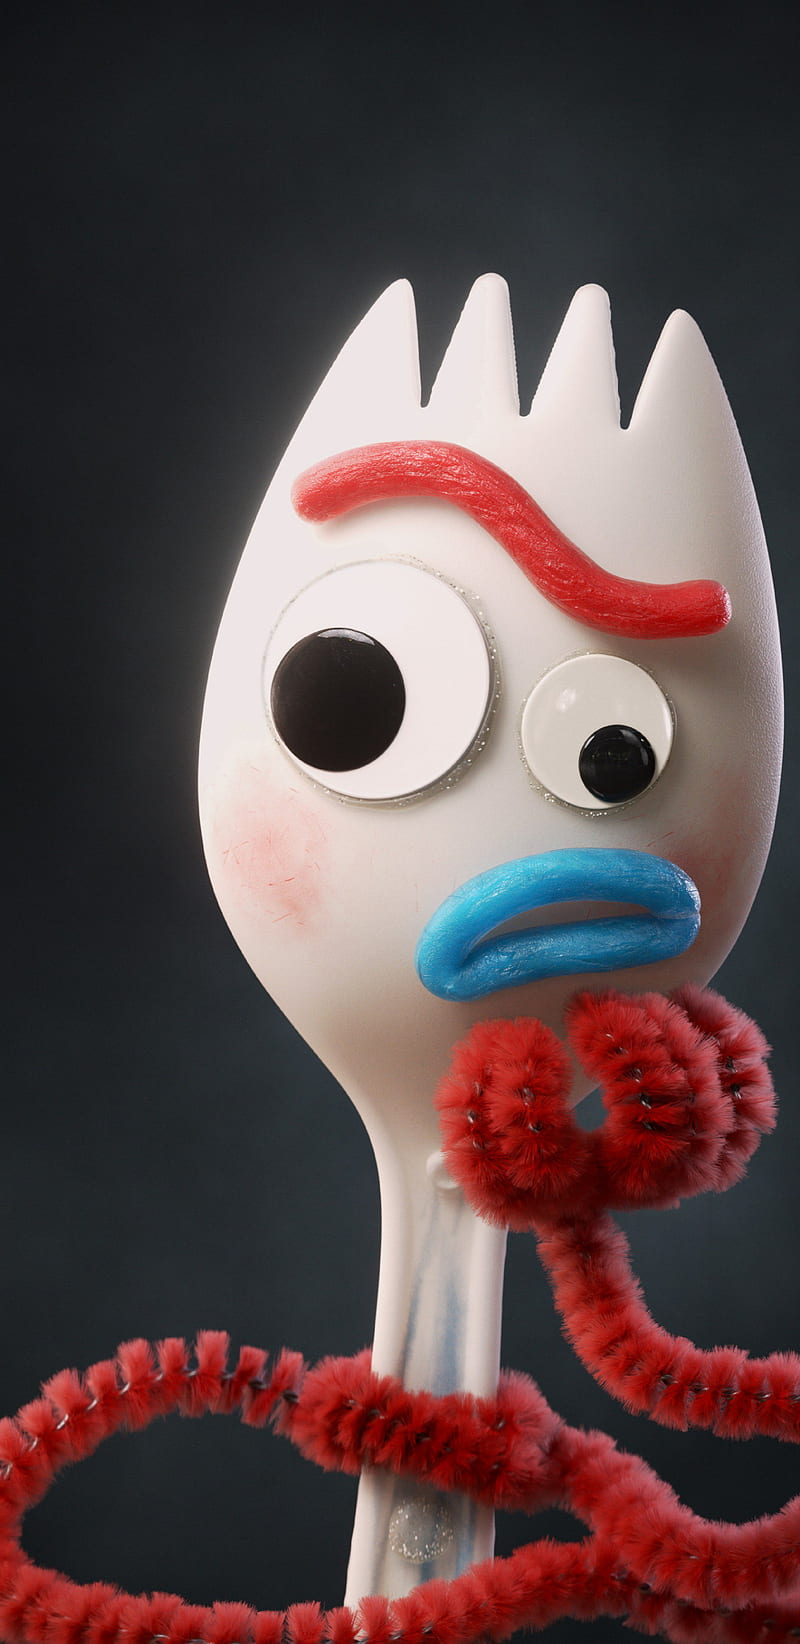 100+] Toy Story Forky Wallpapers